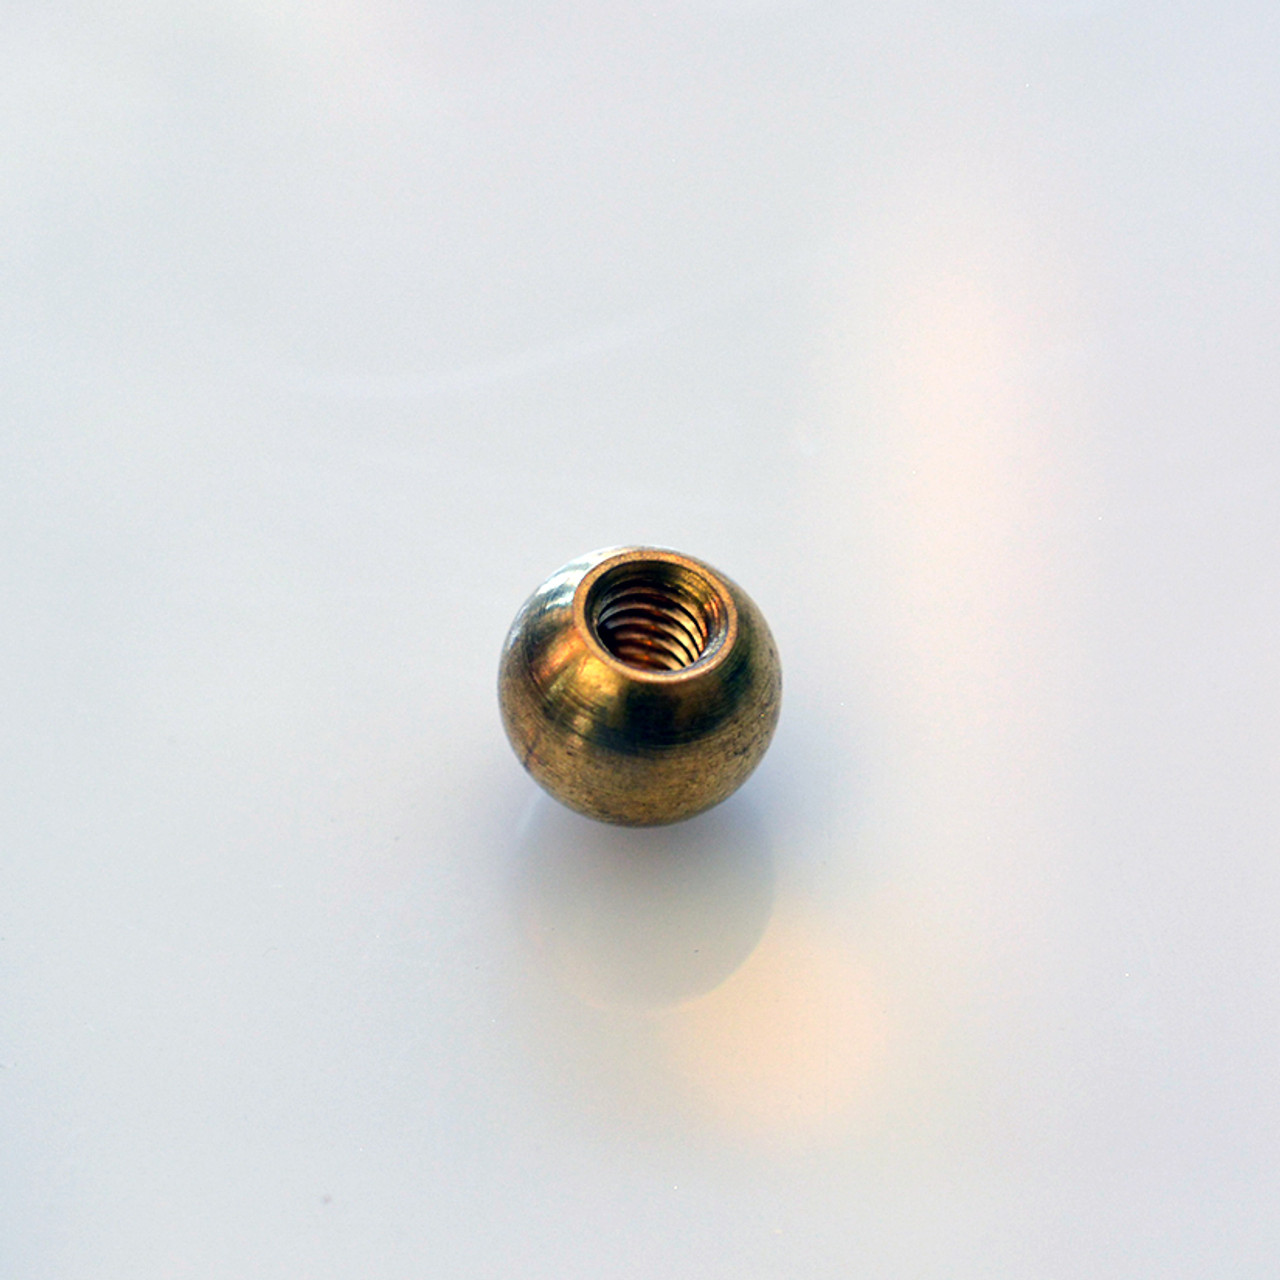 3 in. Long - 8/32 Threaded Brass Rod with 1/2in Long Thread on